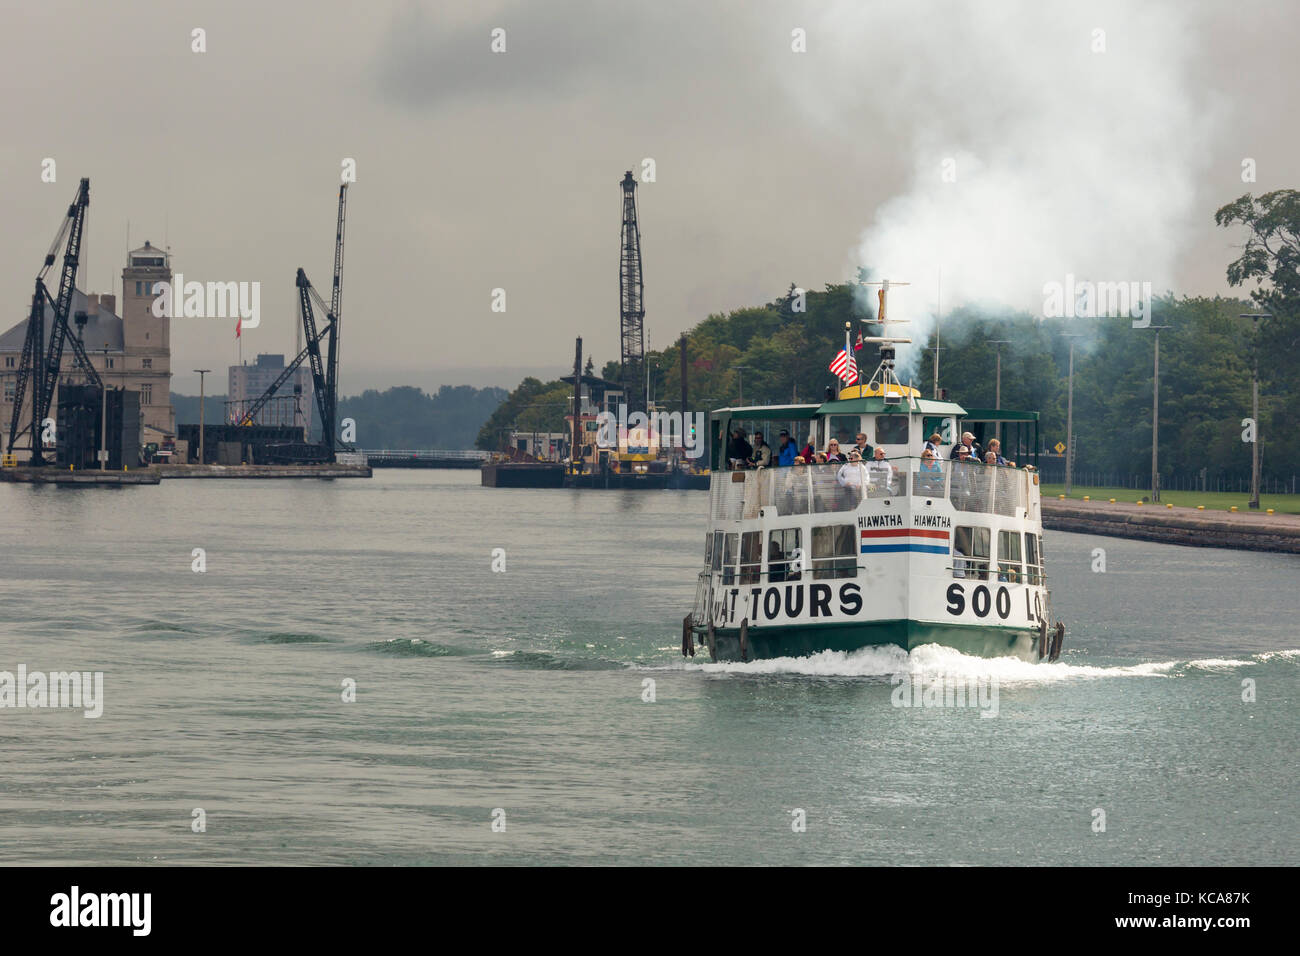 Sault Ste Marie, Michigan - The Soo Locks tour boat leaves the MacArthur Lock. Operated by the U.S. Army Corps of Engineers, the locks enable shipping Stock Photo